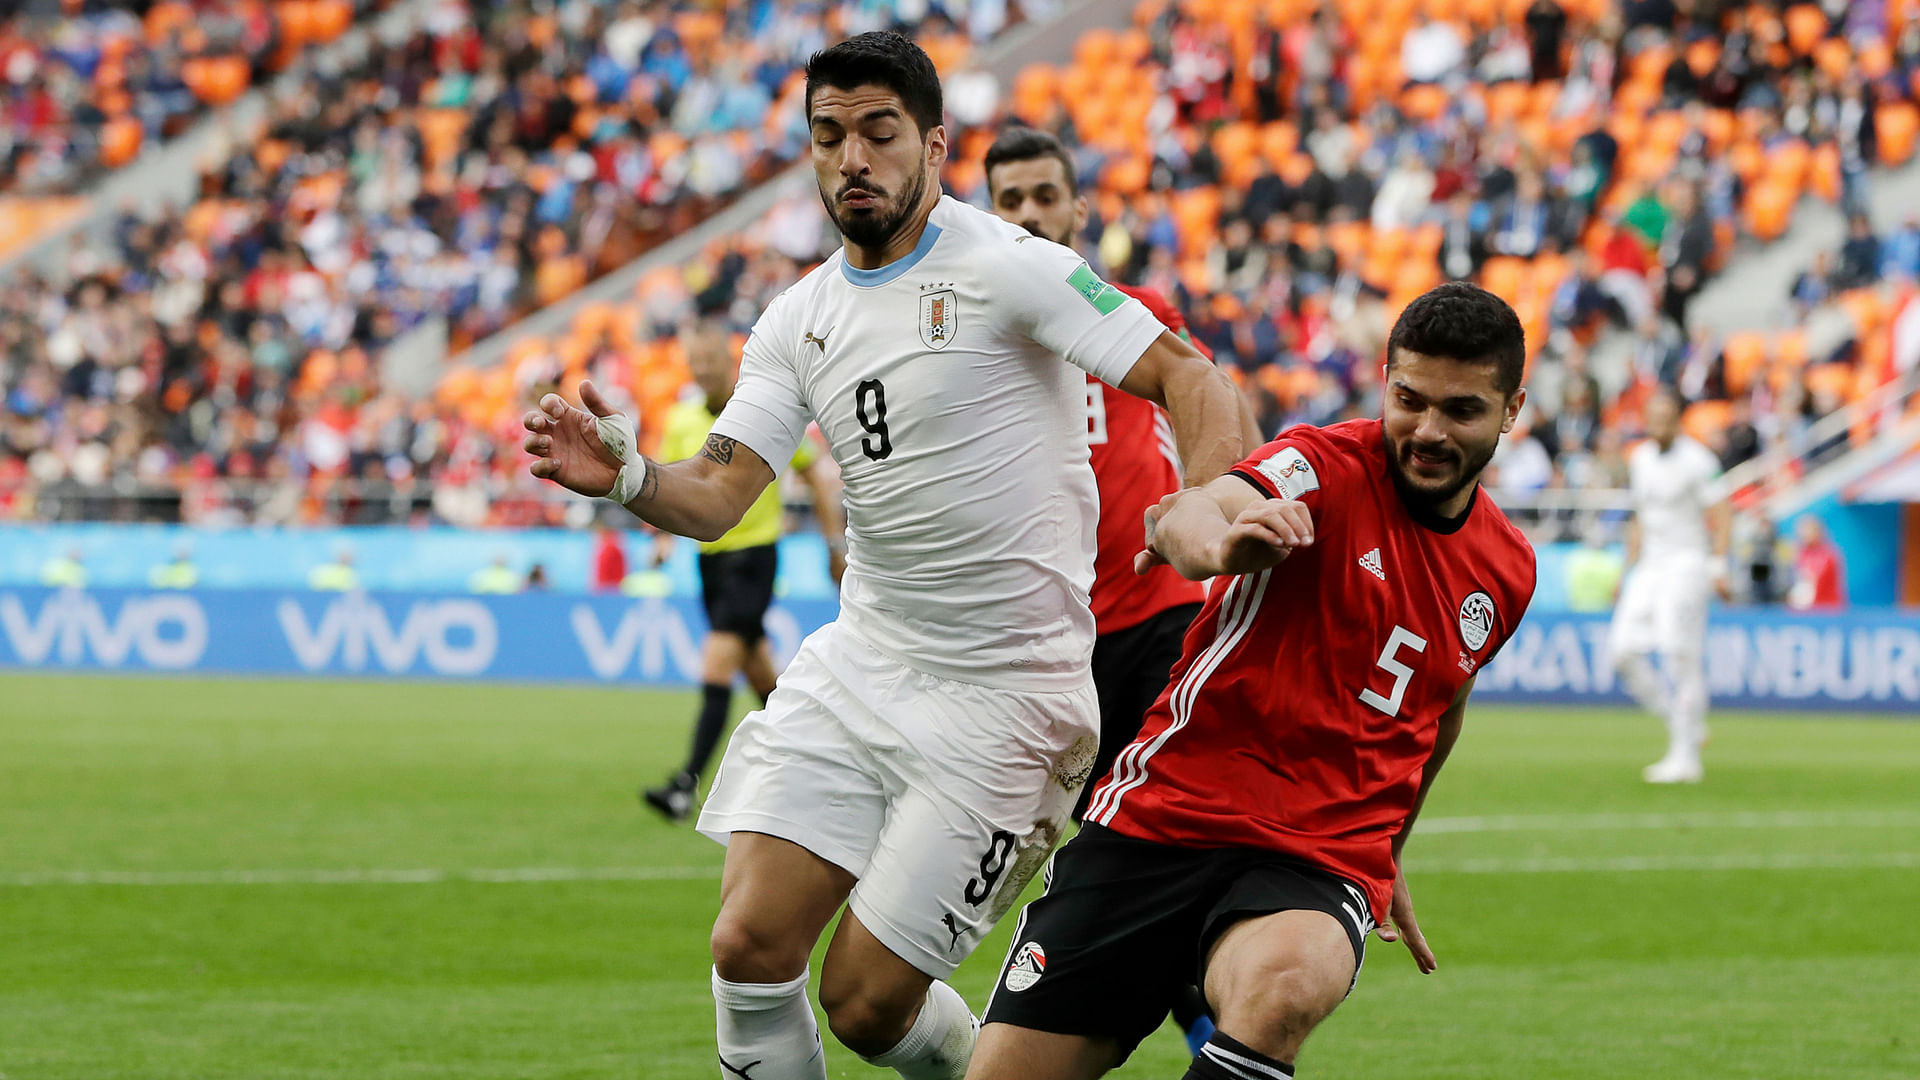 Uruguay’s Luis Suarez,  challenges for the ball with Egypt’s Sam Morsy during the group A match between Egypt and Uruguay at the 2018 FIFA World Cup.